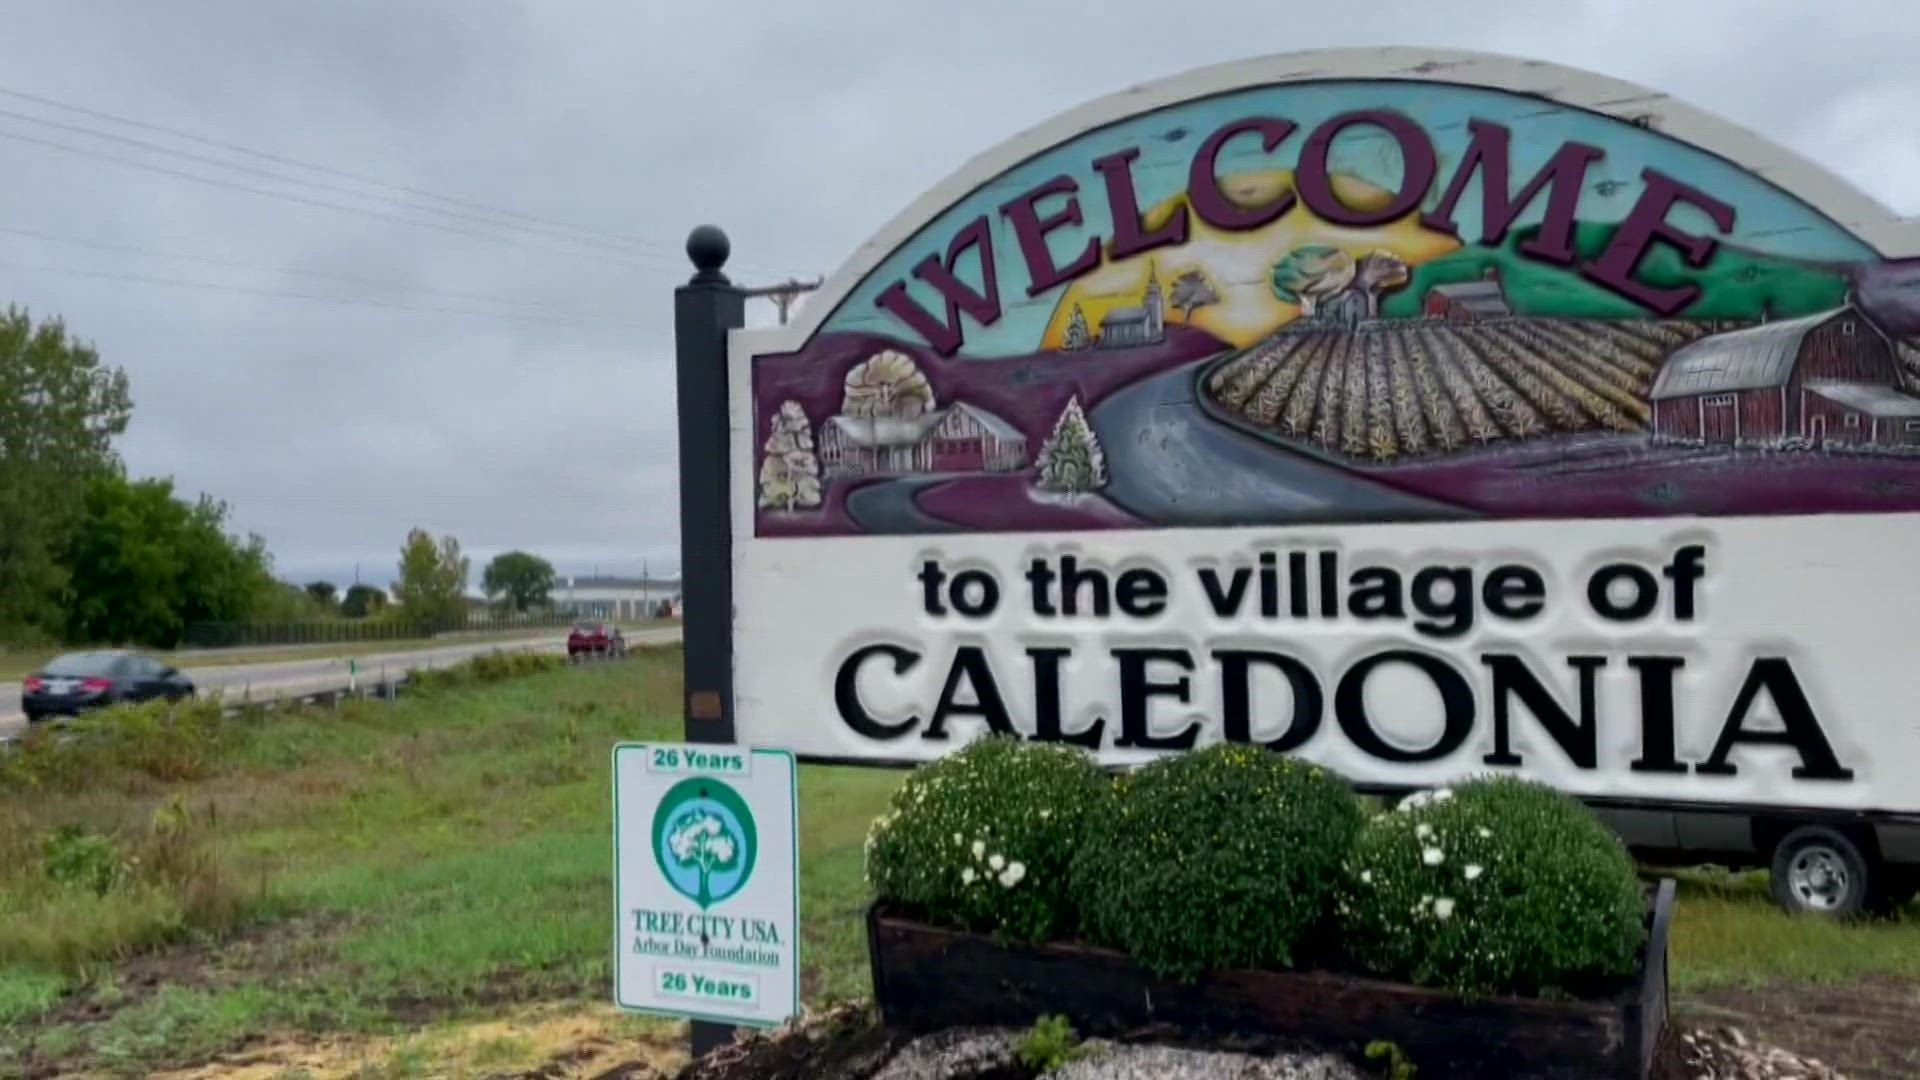 Join us as we explore Caledonia for our third edition of Day Trippin'